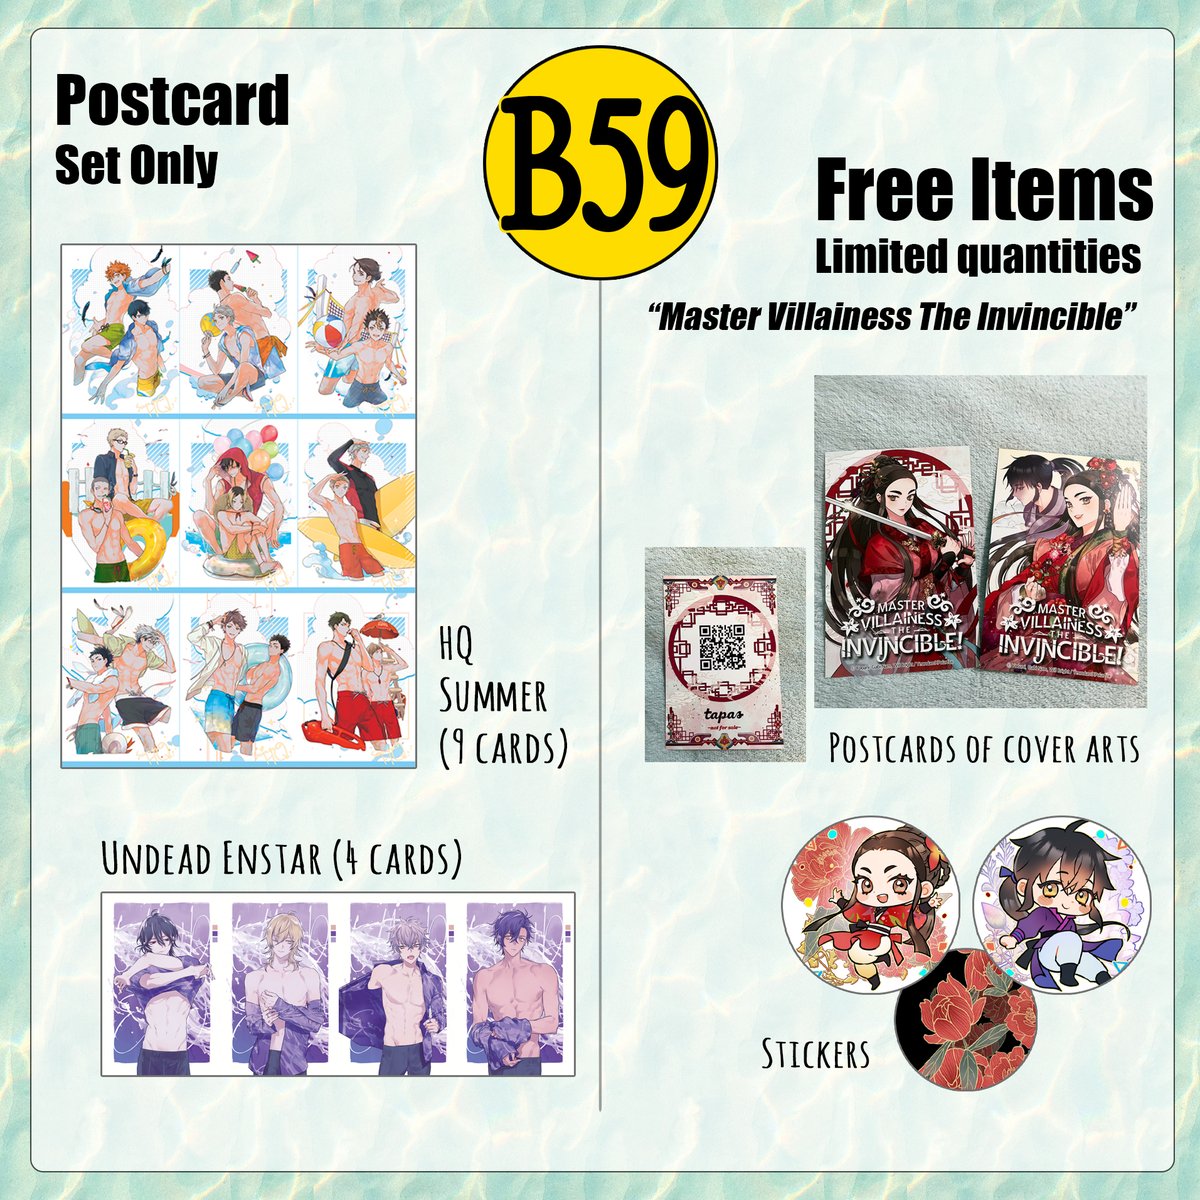 ✨AX 2022 catalog✨

🔶🔶🔶B59 🔶🔶🔶

Not many new arts this year, but I tried 😭💕 I have some free things you can take (one each per person please!) on my table. And I have a tip box 🤭
See you there! 
#AnimeExpo2022 #AX2022 #AX2022ArtistAlley #mastervillainesstheinvincible